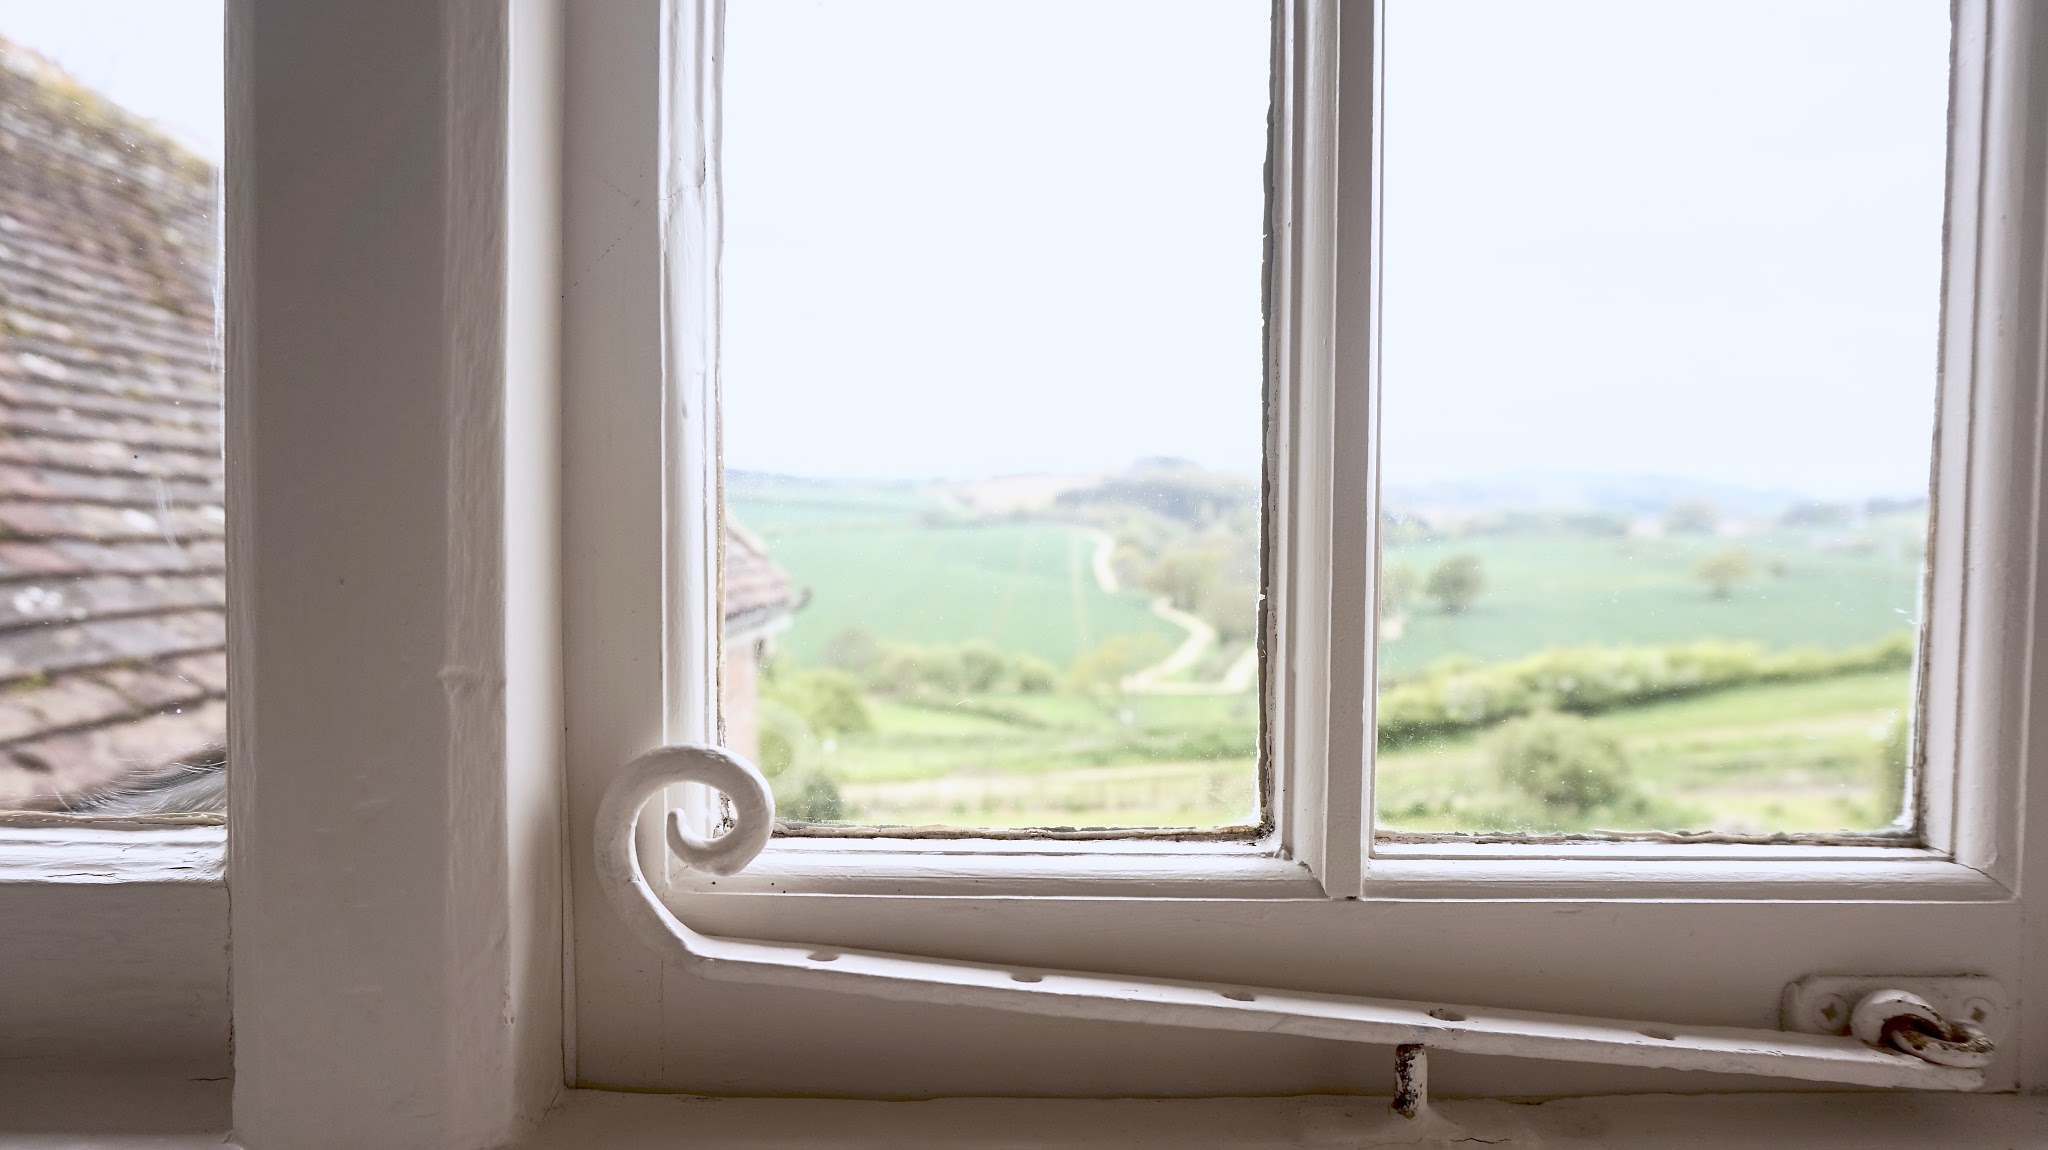 scenic view of the English countryside through an old fashioned window